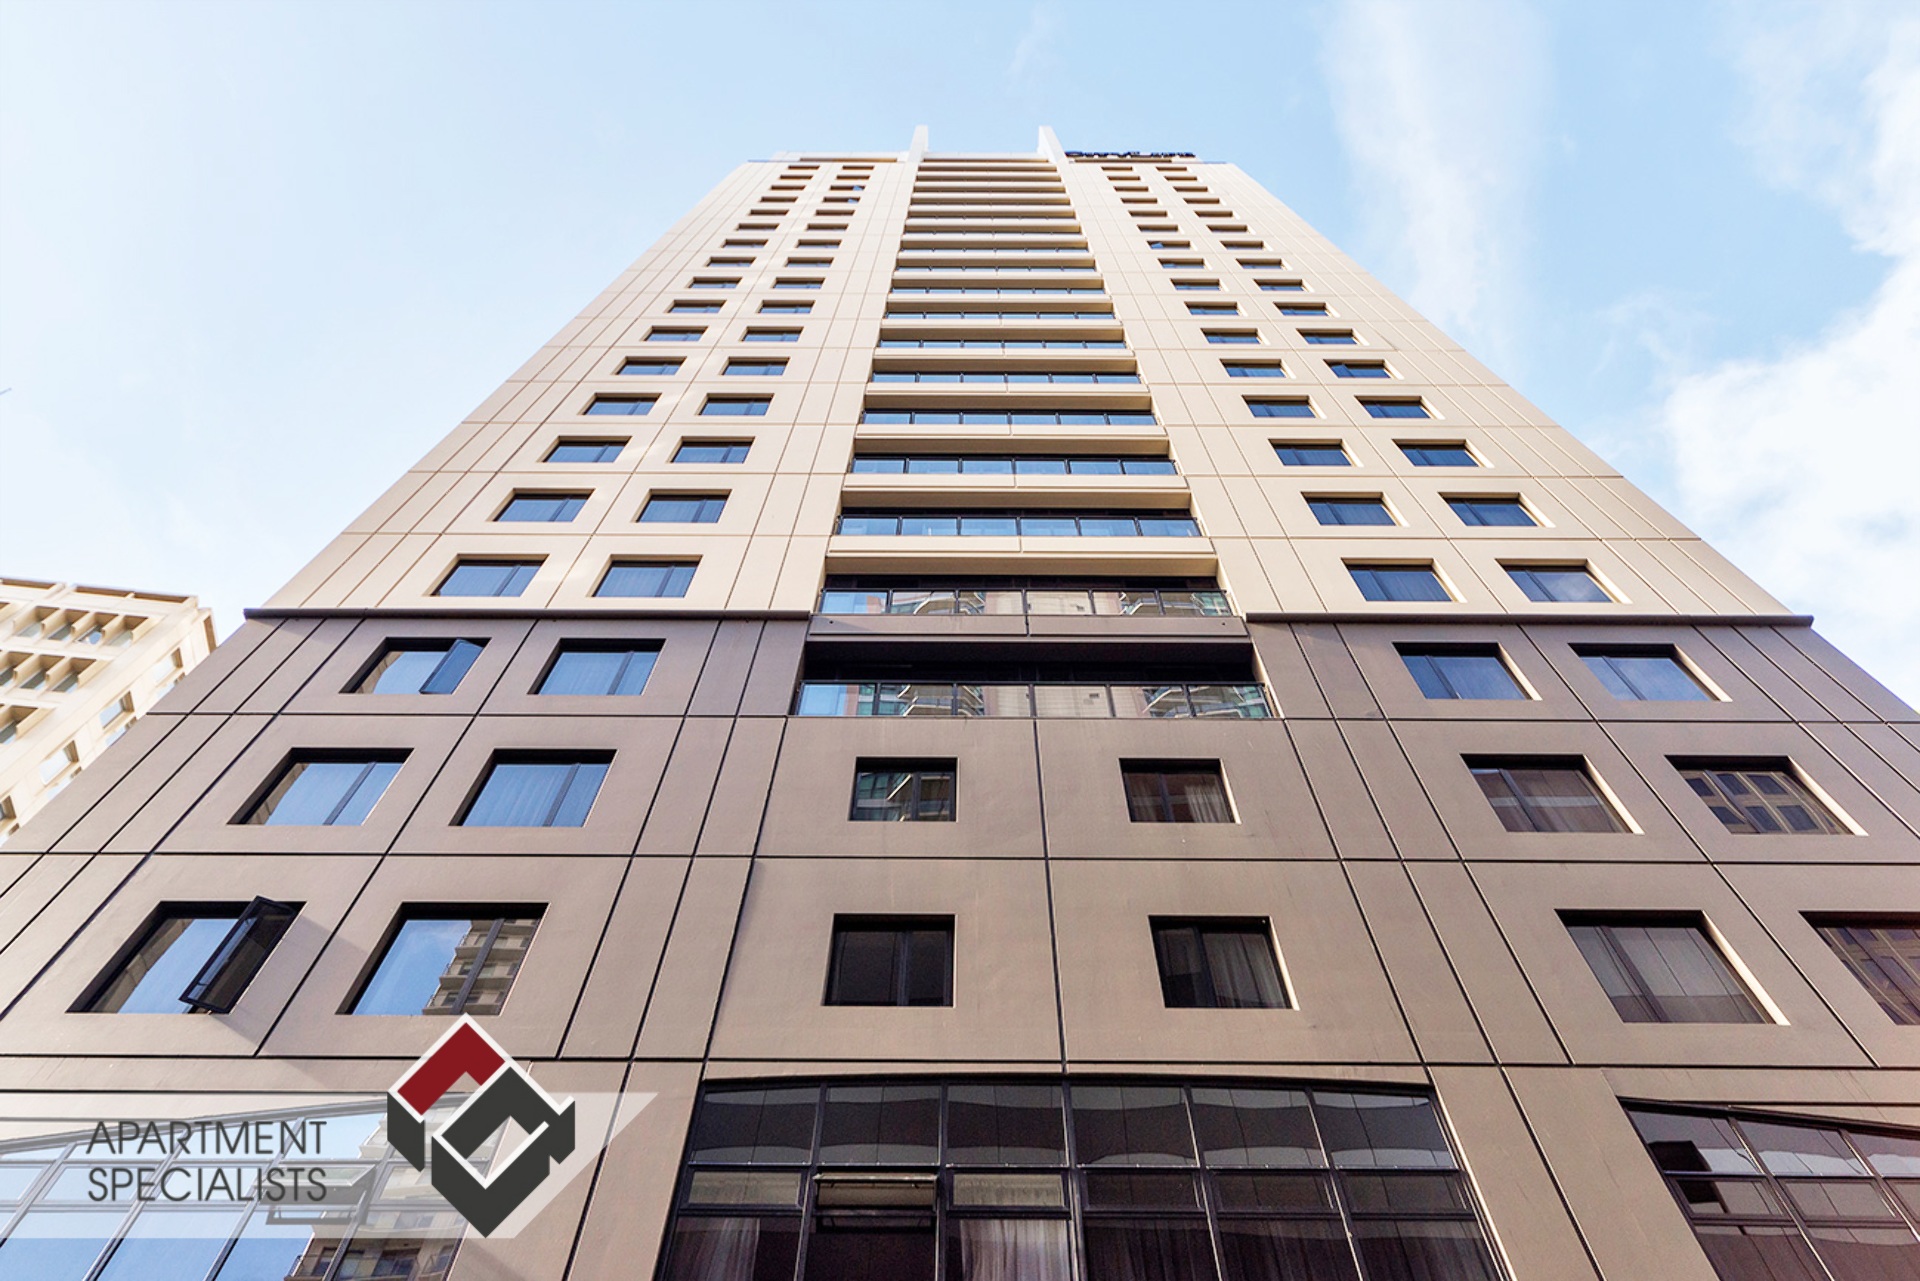 5 | 171 Queen Street, City Centre | Apartment Specialists